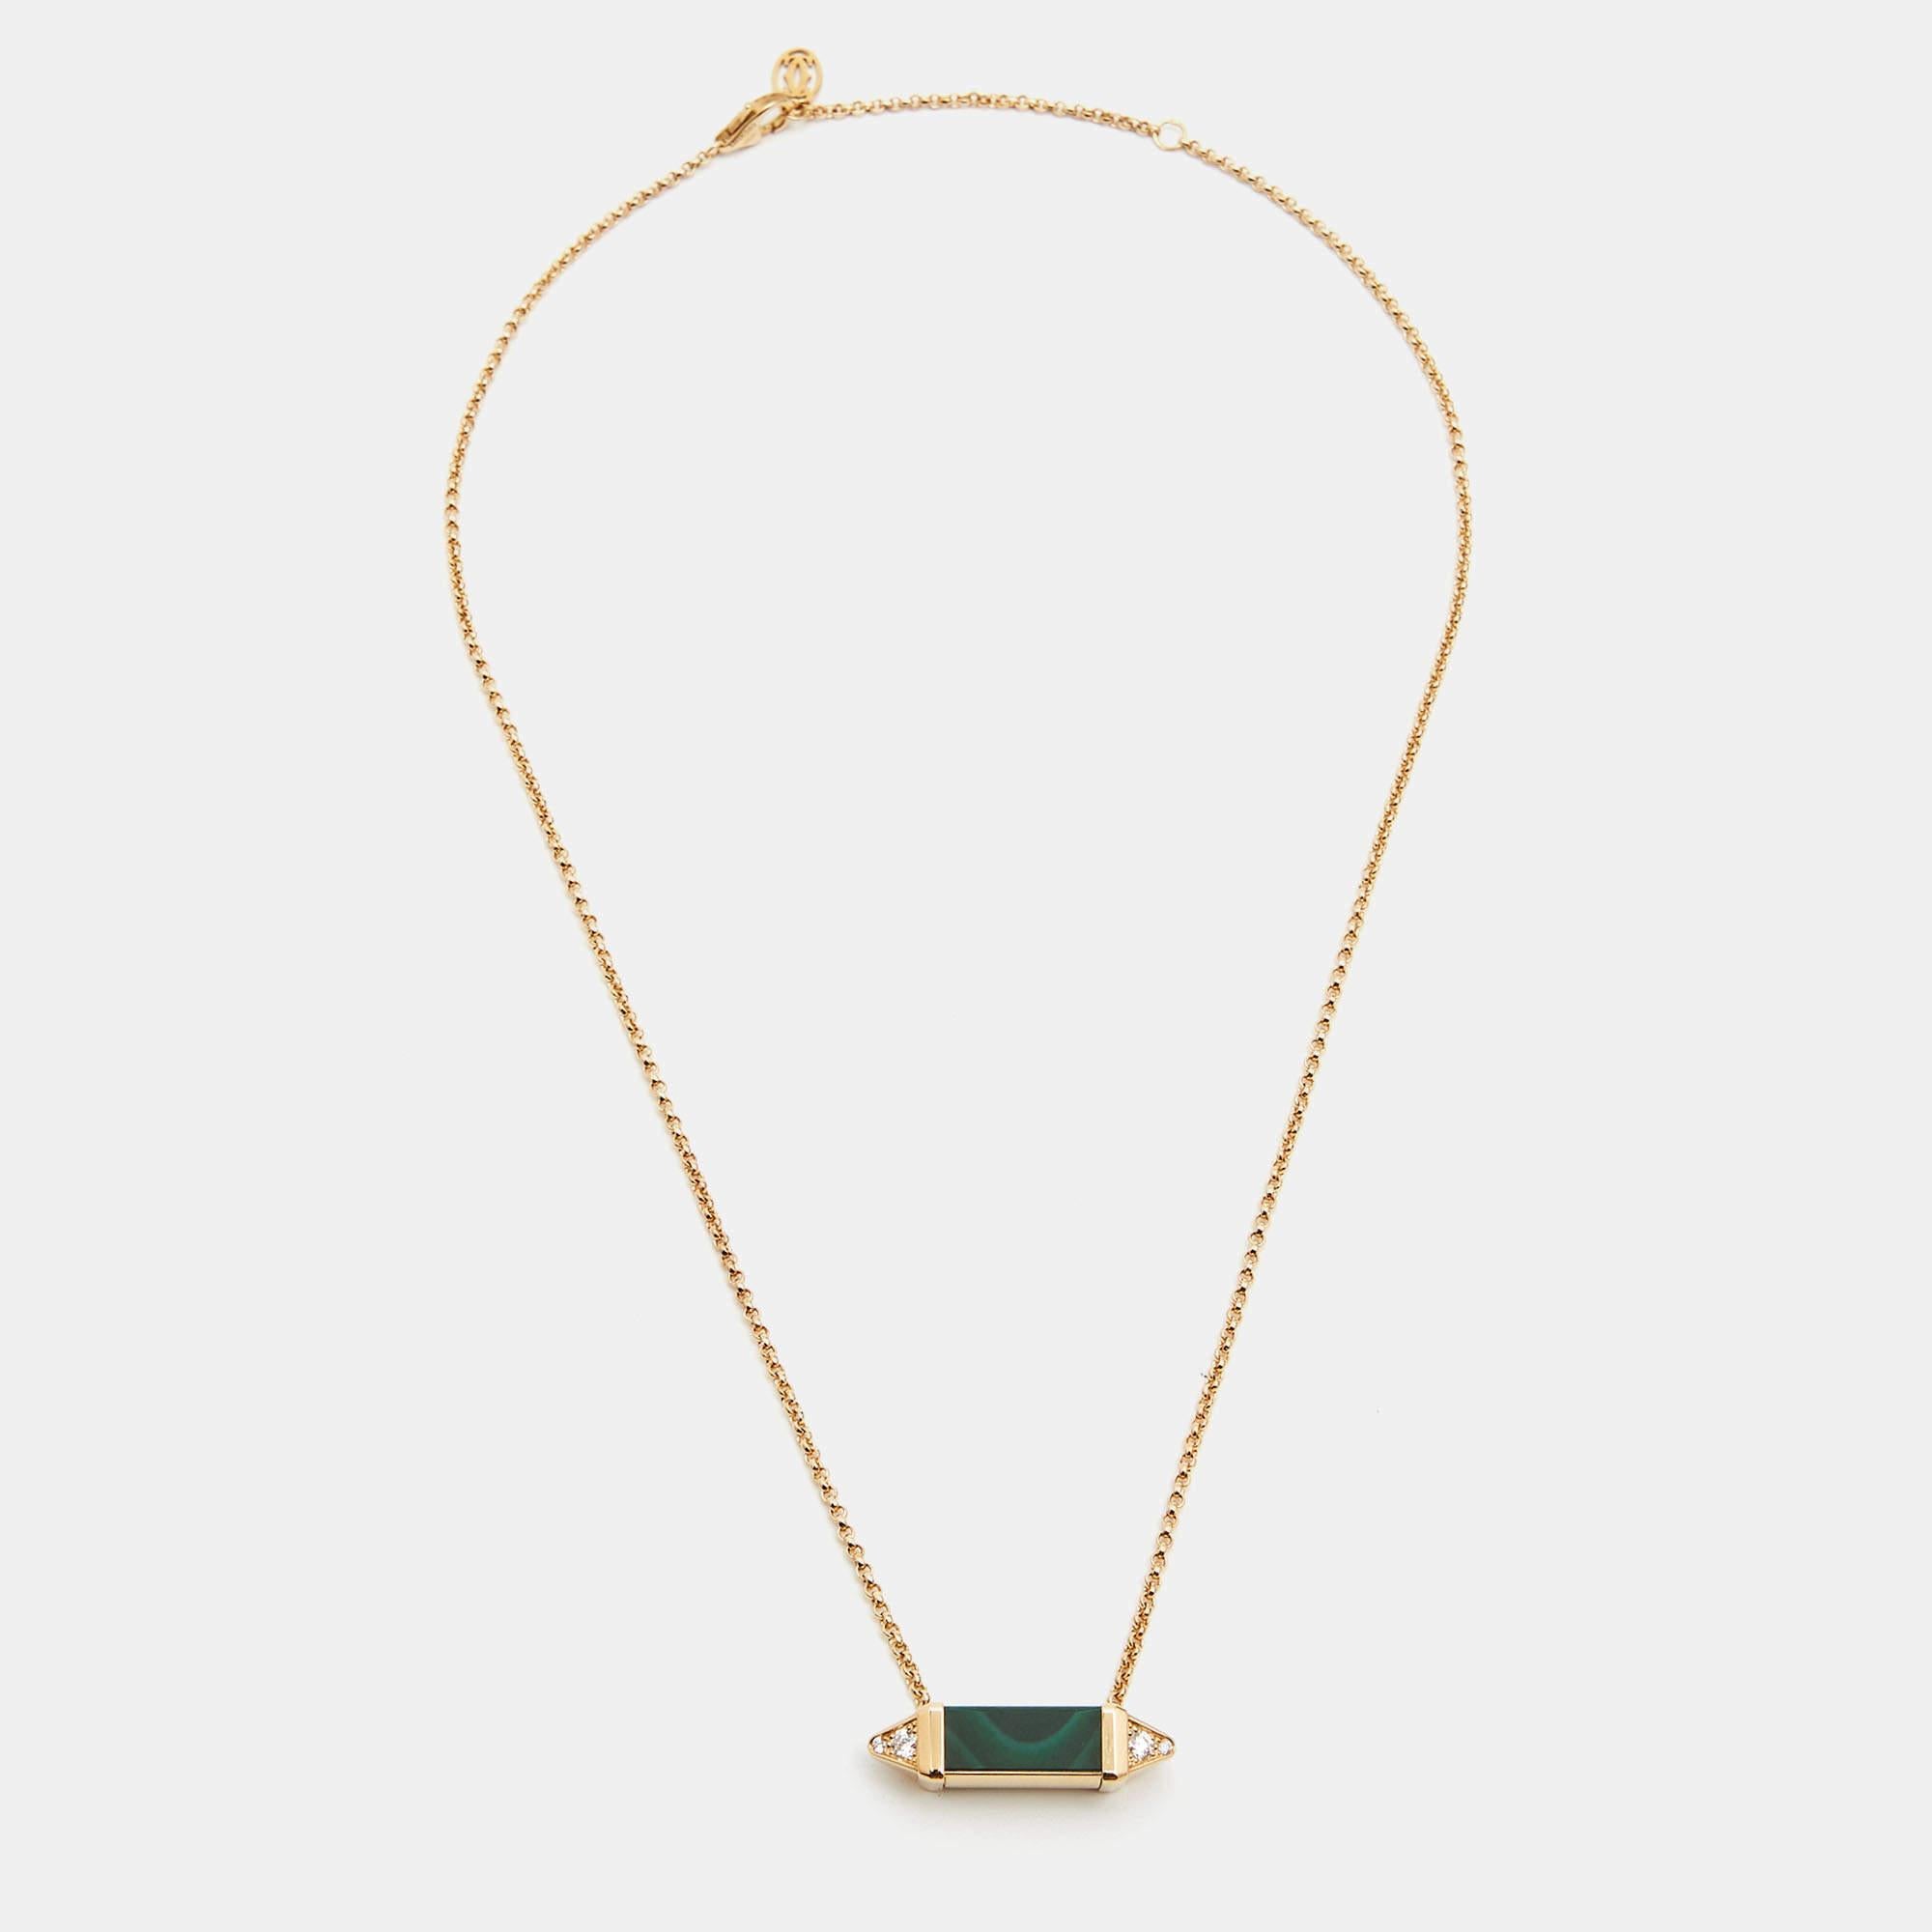 This Les Berlingots de Cartier necklace is from a collection that plays beautifully with contrasting elements and sculptural lines to create jewels that are modern in appearance and truly classic in spirit. The chain necklace is cast in 18k yellow